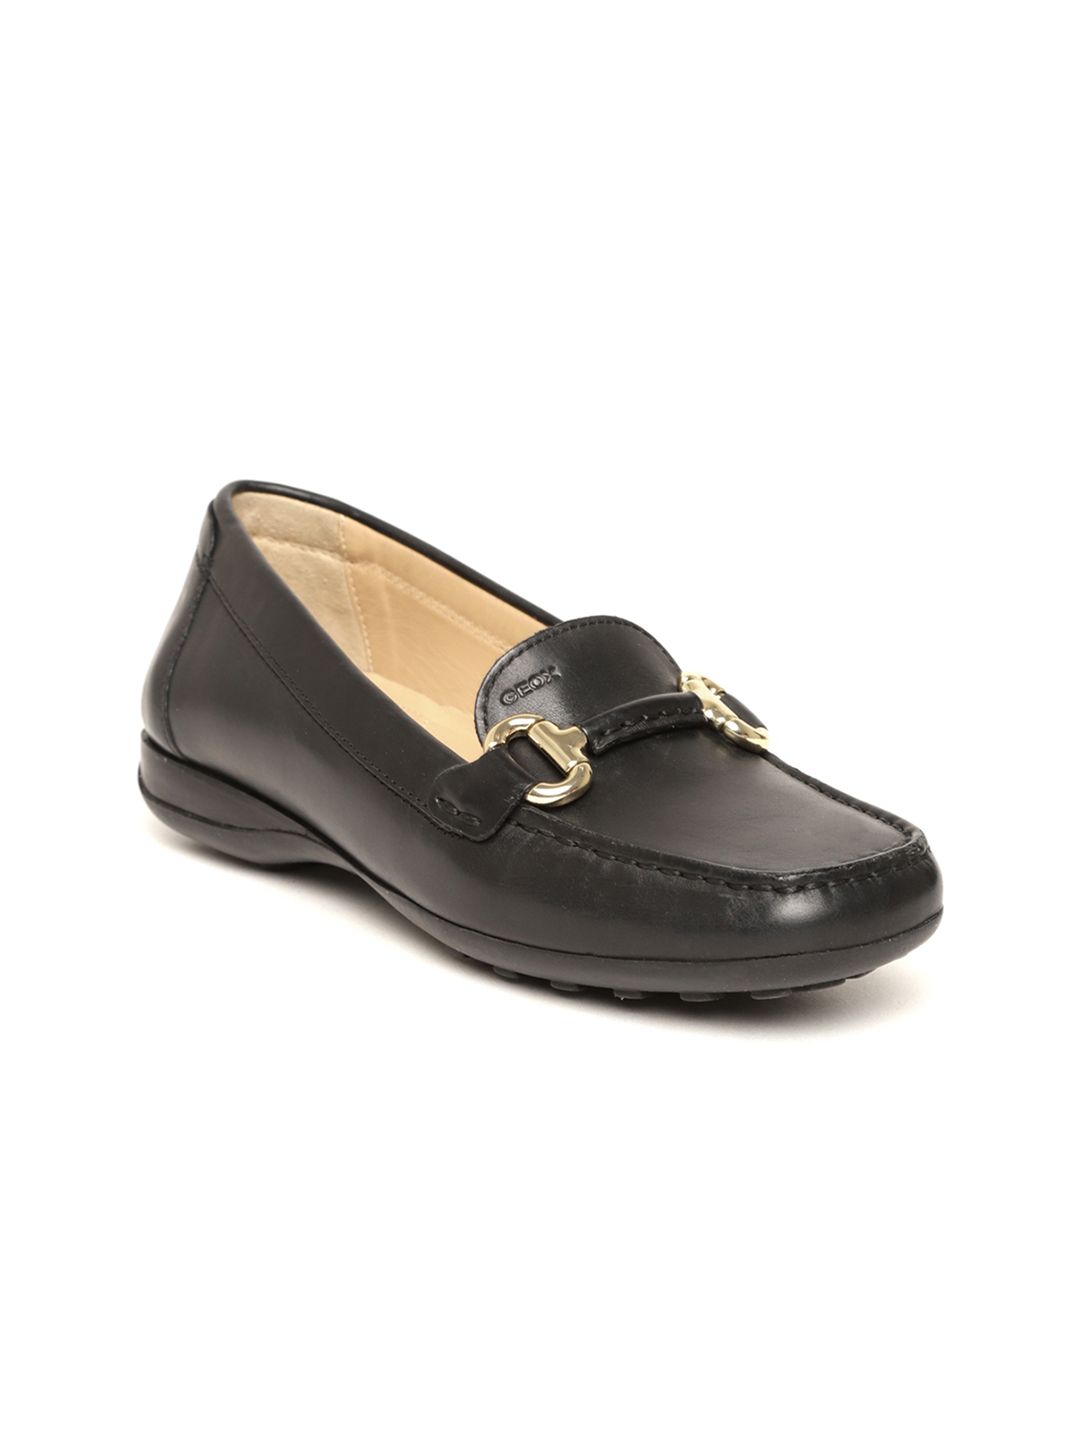 Geox Women Black Solid Leather Loafers Price in Specifications & Offers |